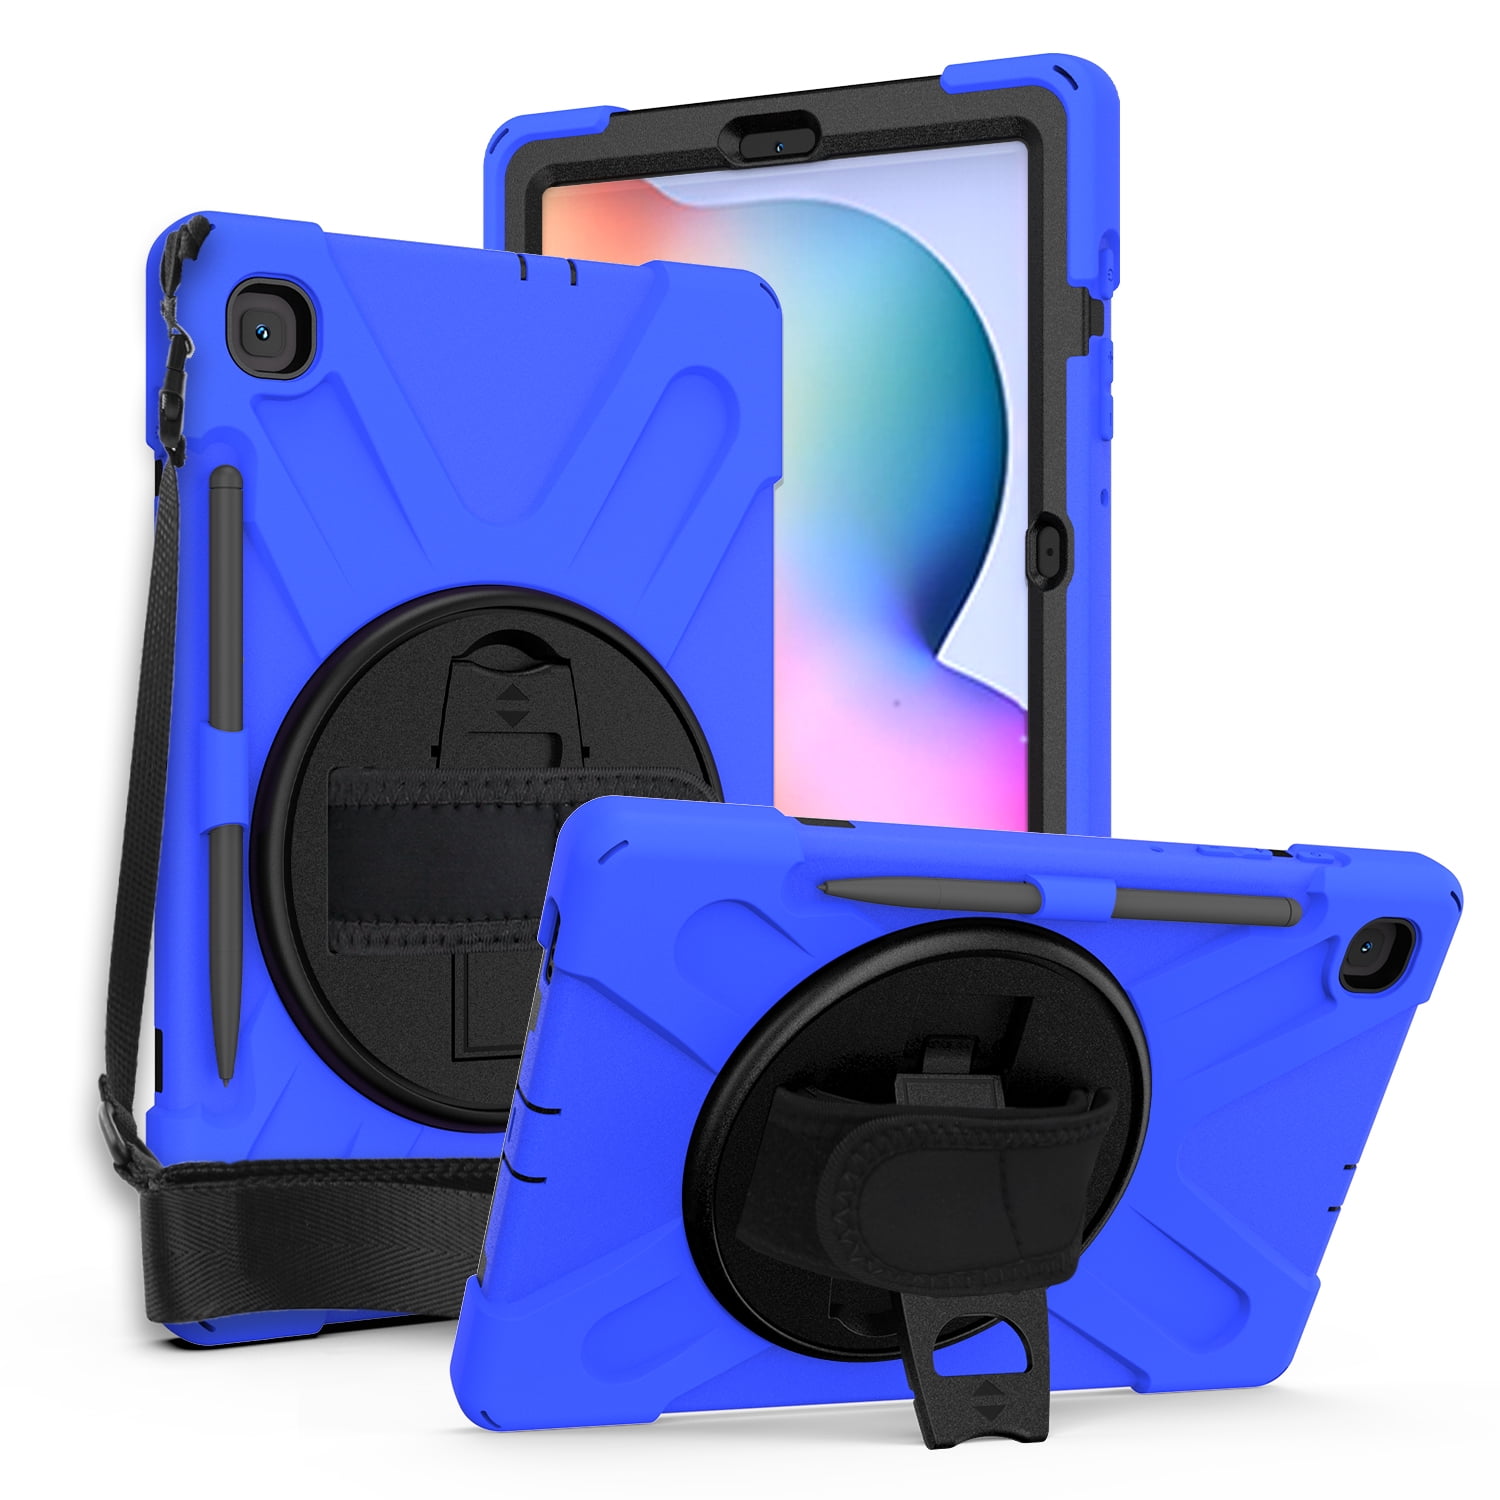 twintig Oven Hoe dan ook KIQ Shield Series Galaxy S6 Lite Case , Heavy Duty Tablet Shockproof Rugged  Cover W/Stand Shoulder Strap for Samsung Galaxy Tab S6 Lite Case 10.4-inch  2022/2020 P610/P613/P615/P619 [Black] - Walmart.com